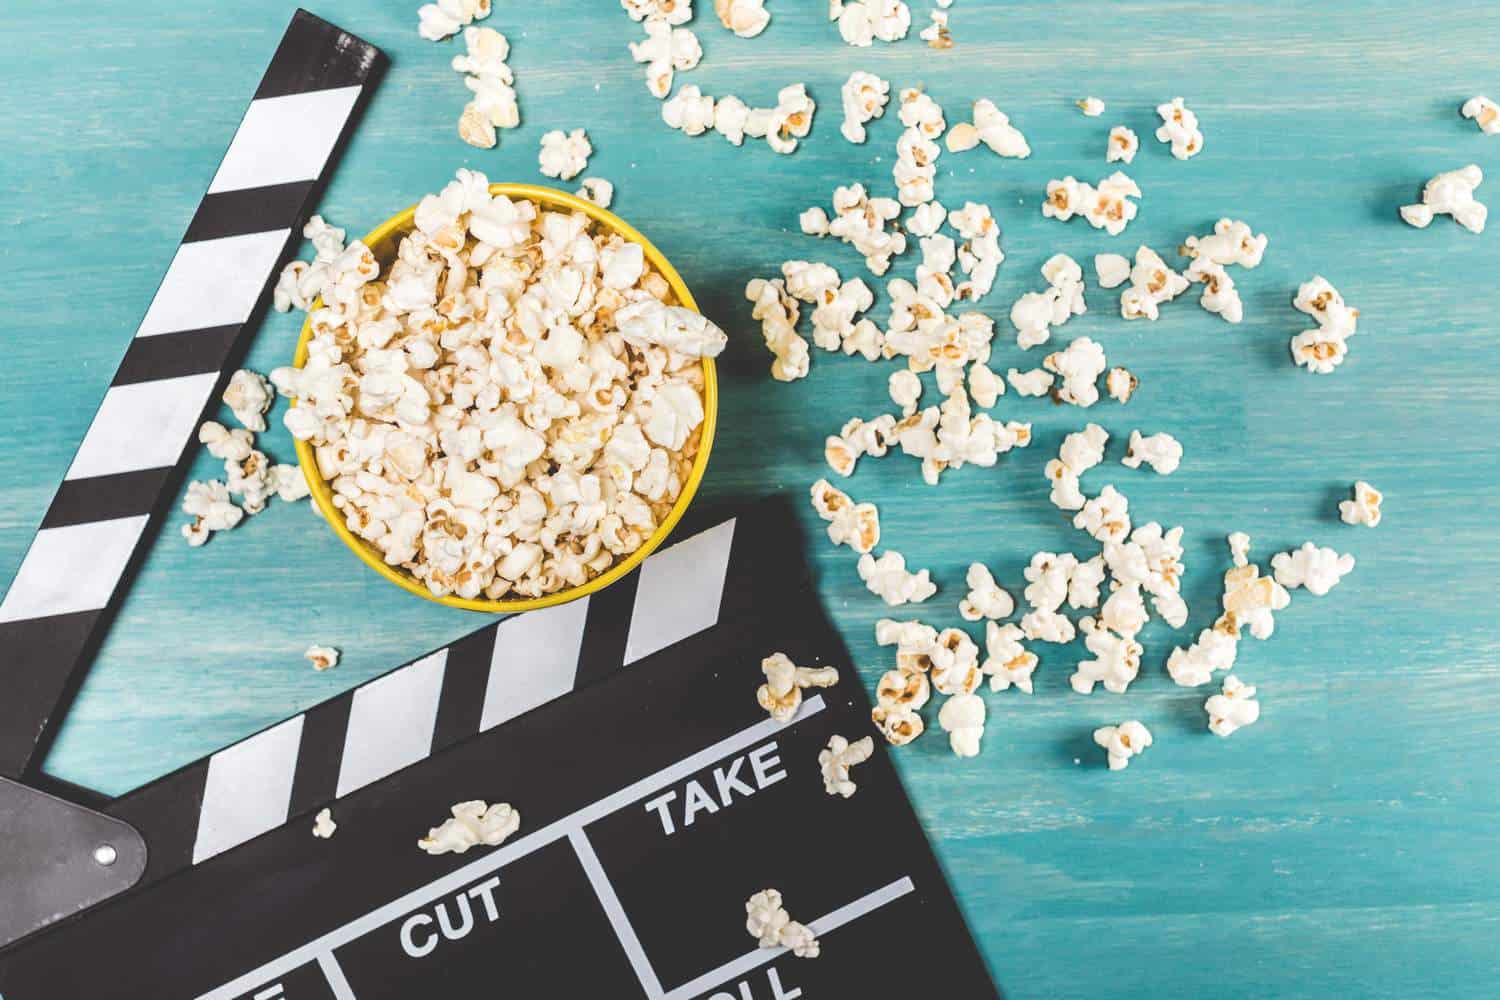 Movie popcorn and a clapper on a turquoise painted background